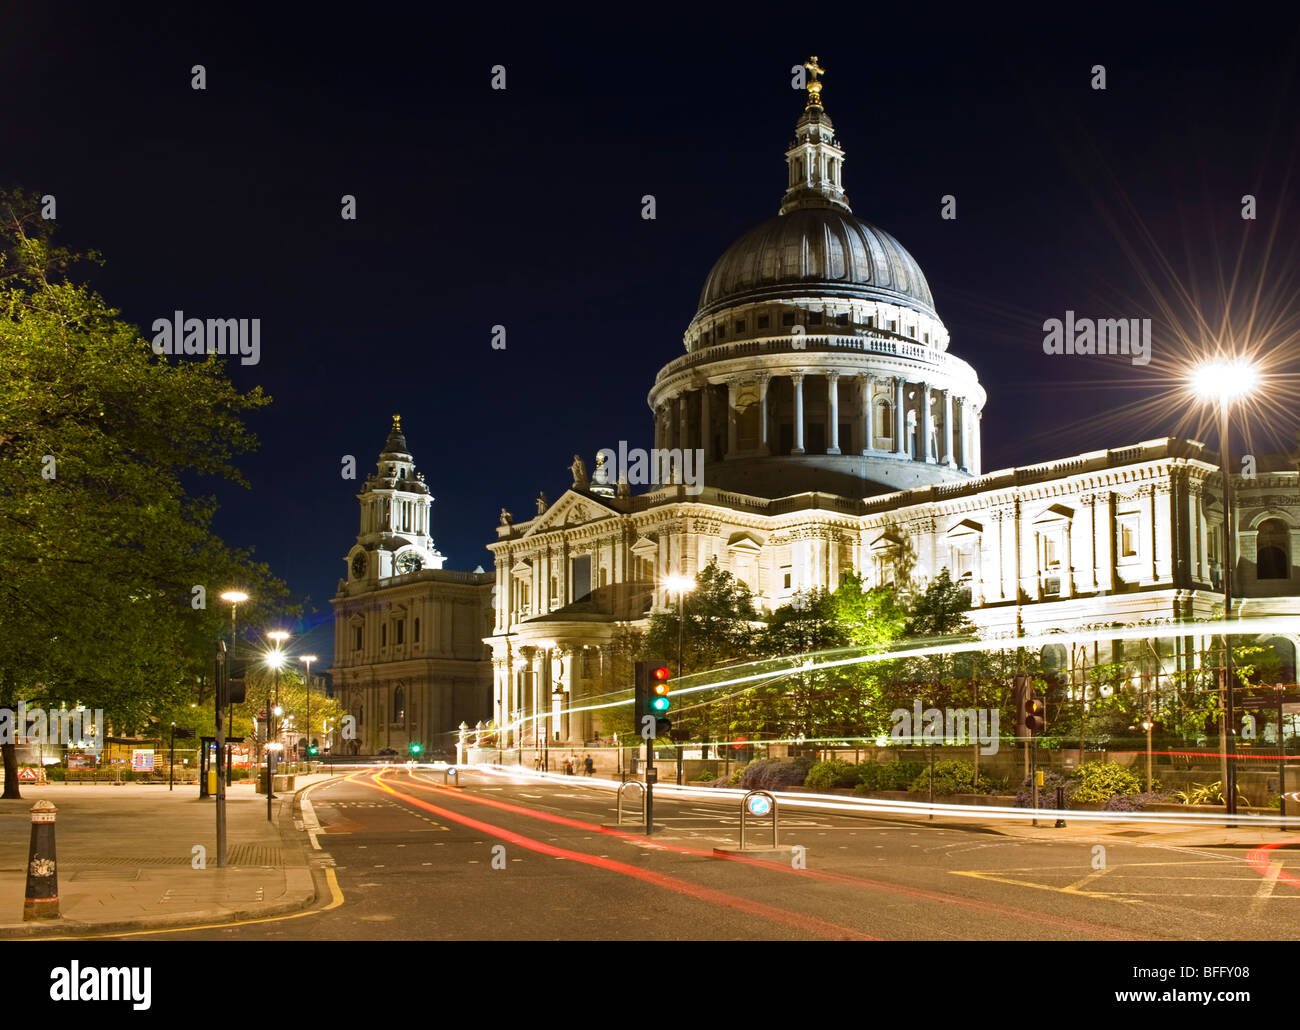 St Paul's Cathedral at Night, London, England, UK Stock Photo